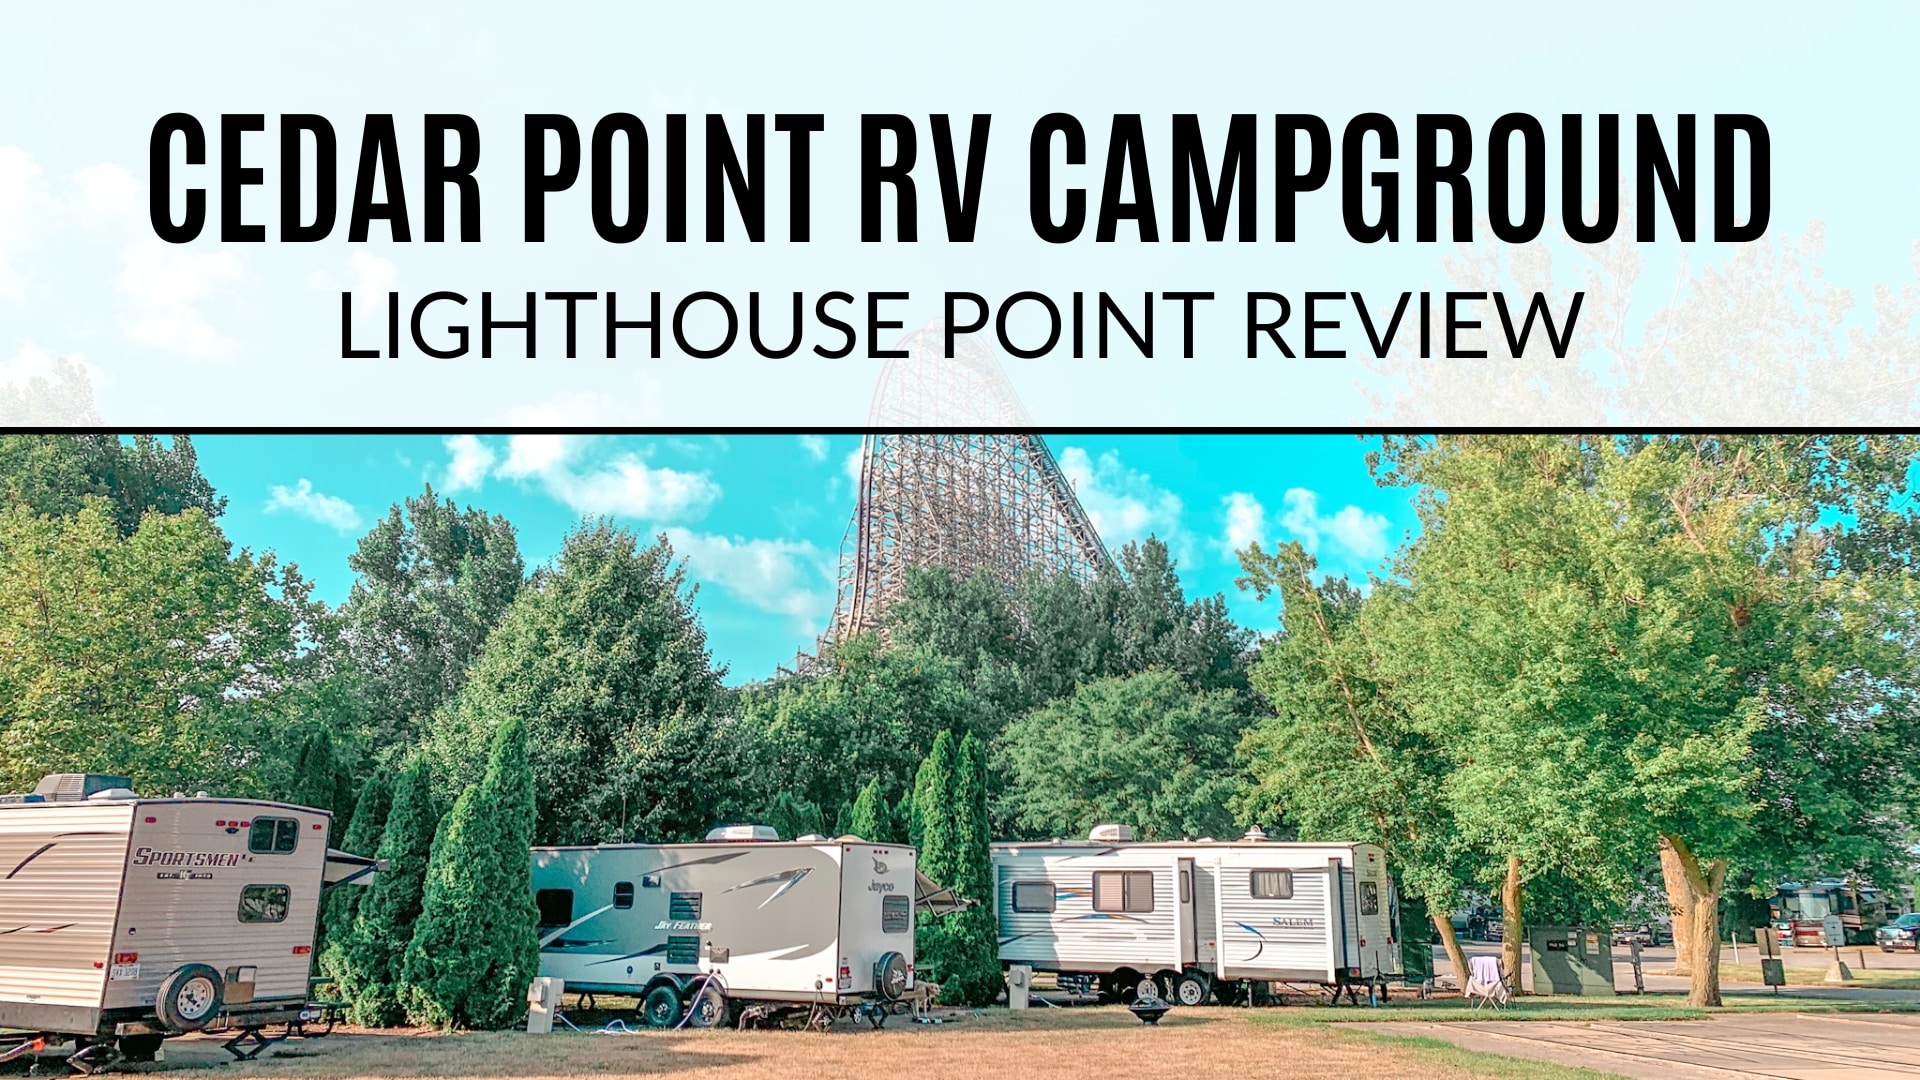 Three travel trailers parked in campground with trees and Steel Vengeance roller coaster in background. Text on the image says "Cedar Point RV Campground. Lighthouse Point Review"